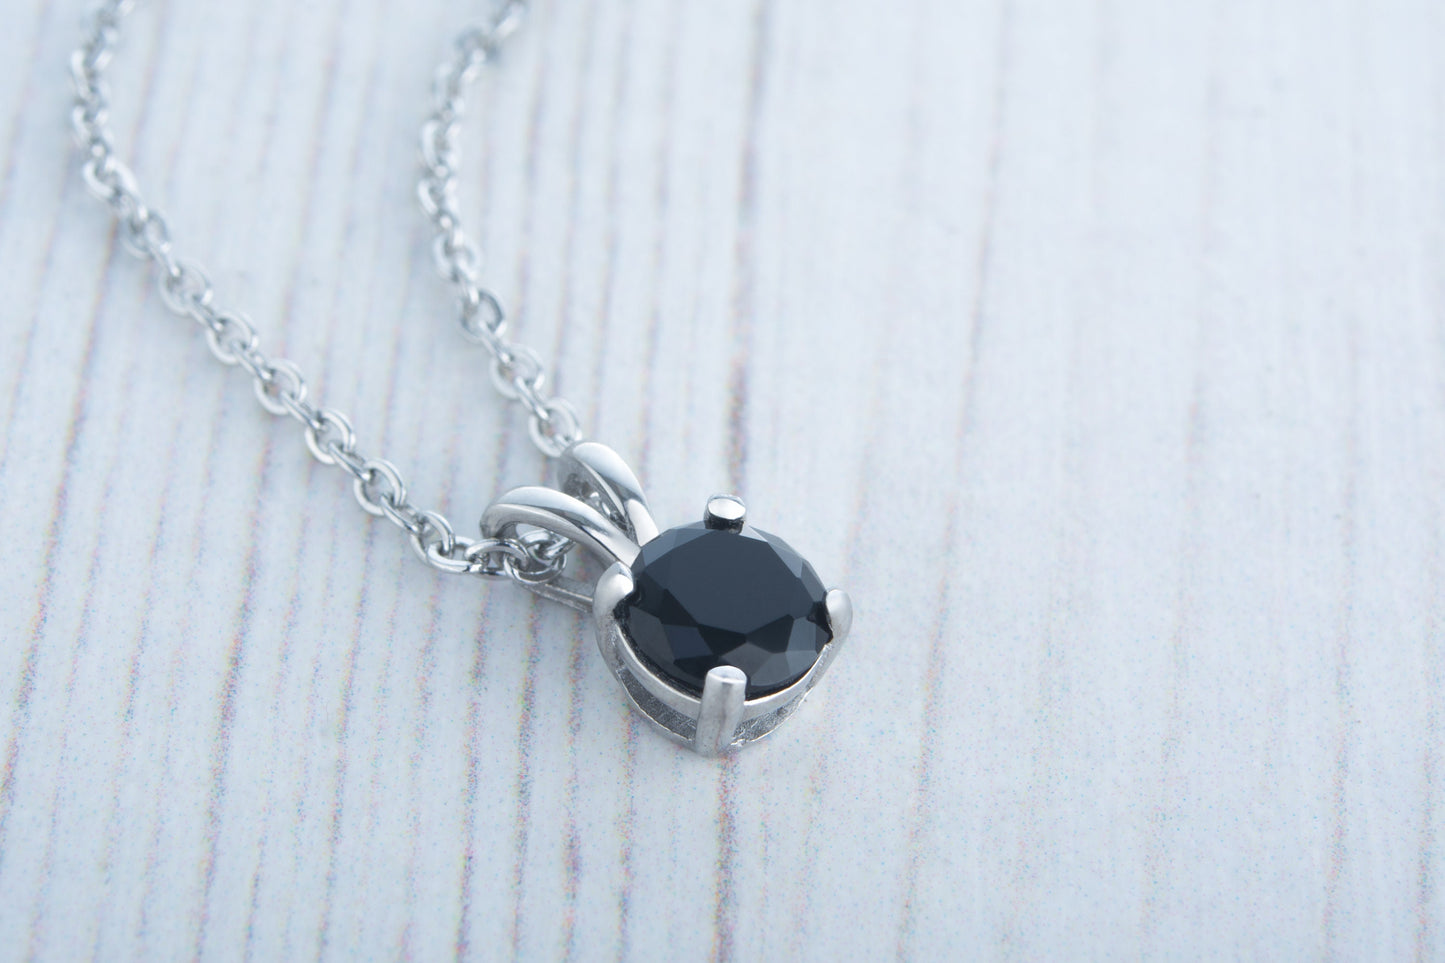 Genuine Onyx Pendant Necklace - Available in white gold and titanium - 4mm, 5mm, 6mm, 7mm sizes